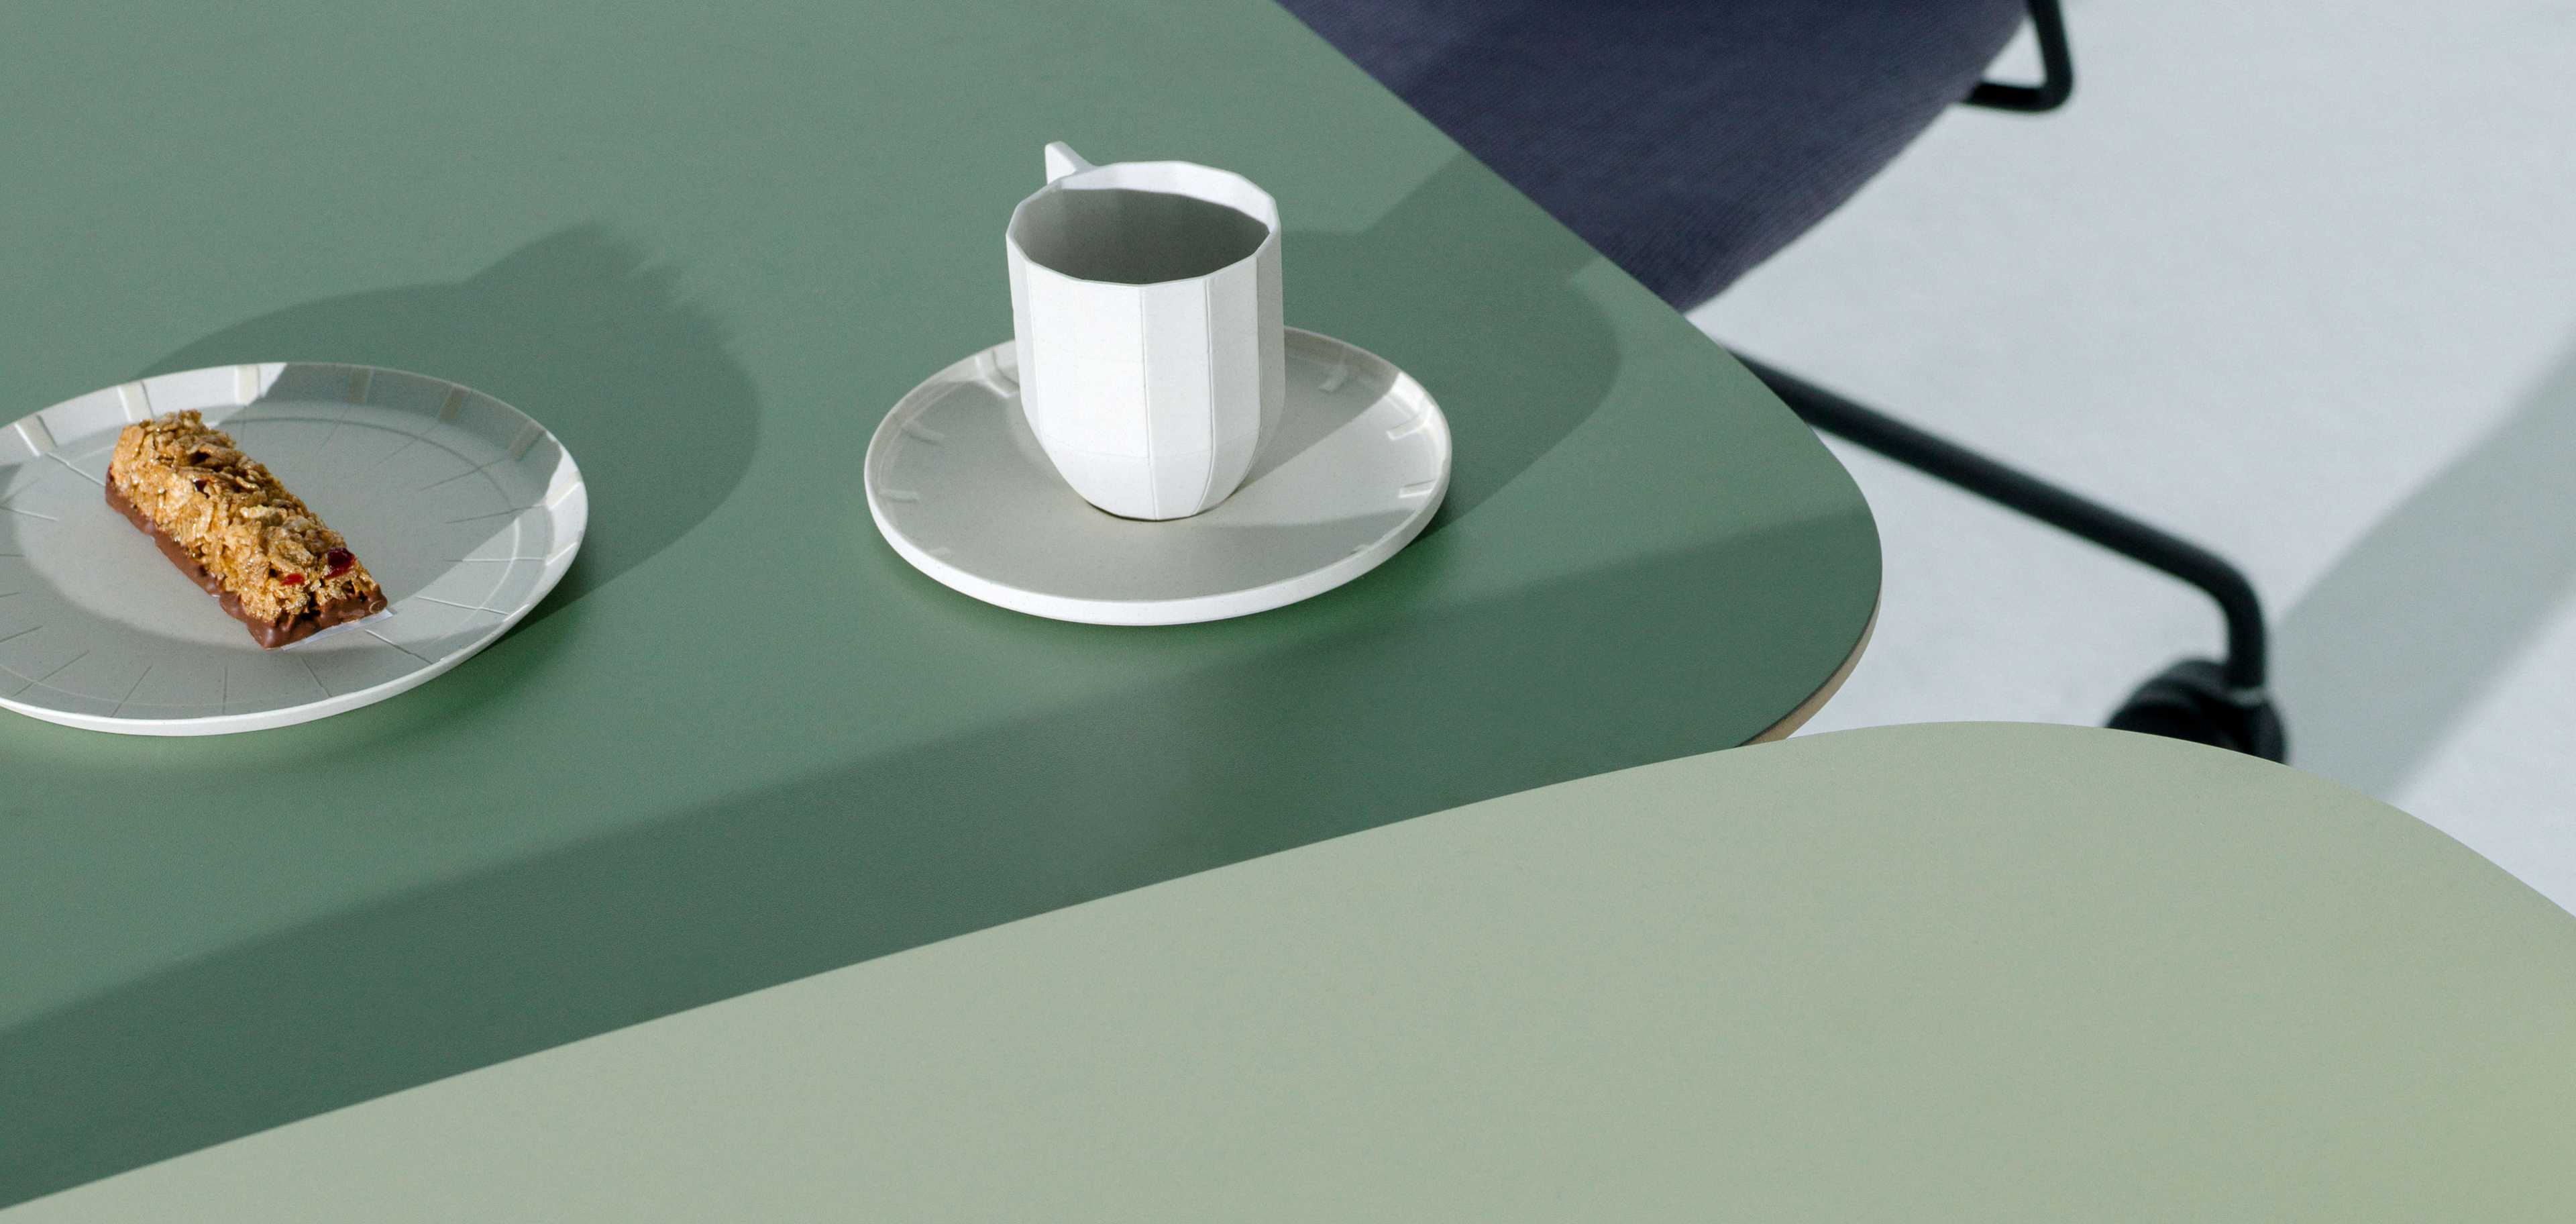 Green desks with coffee